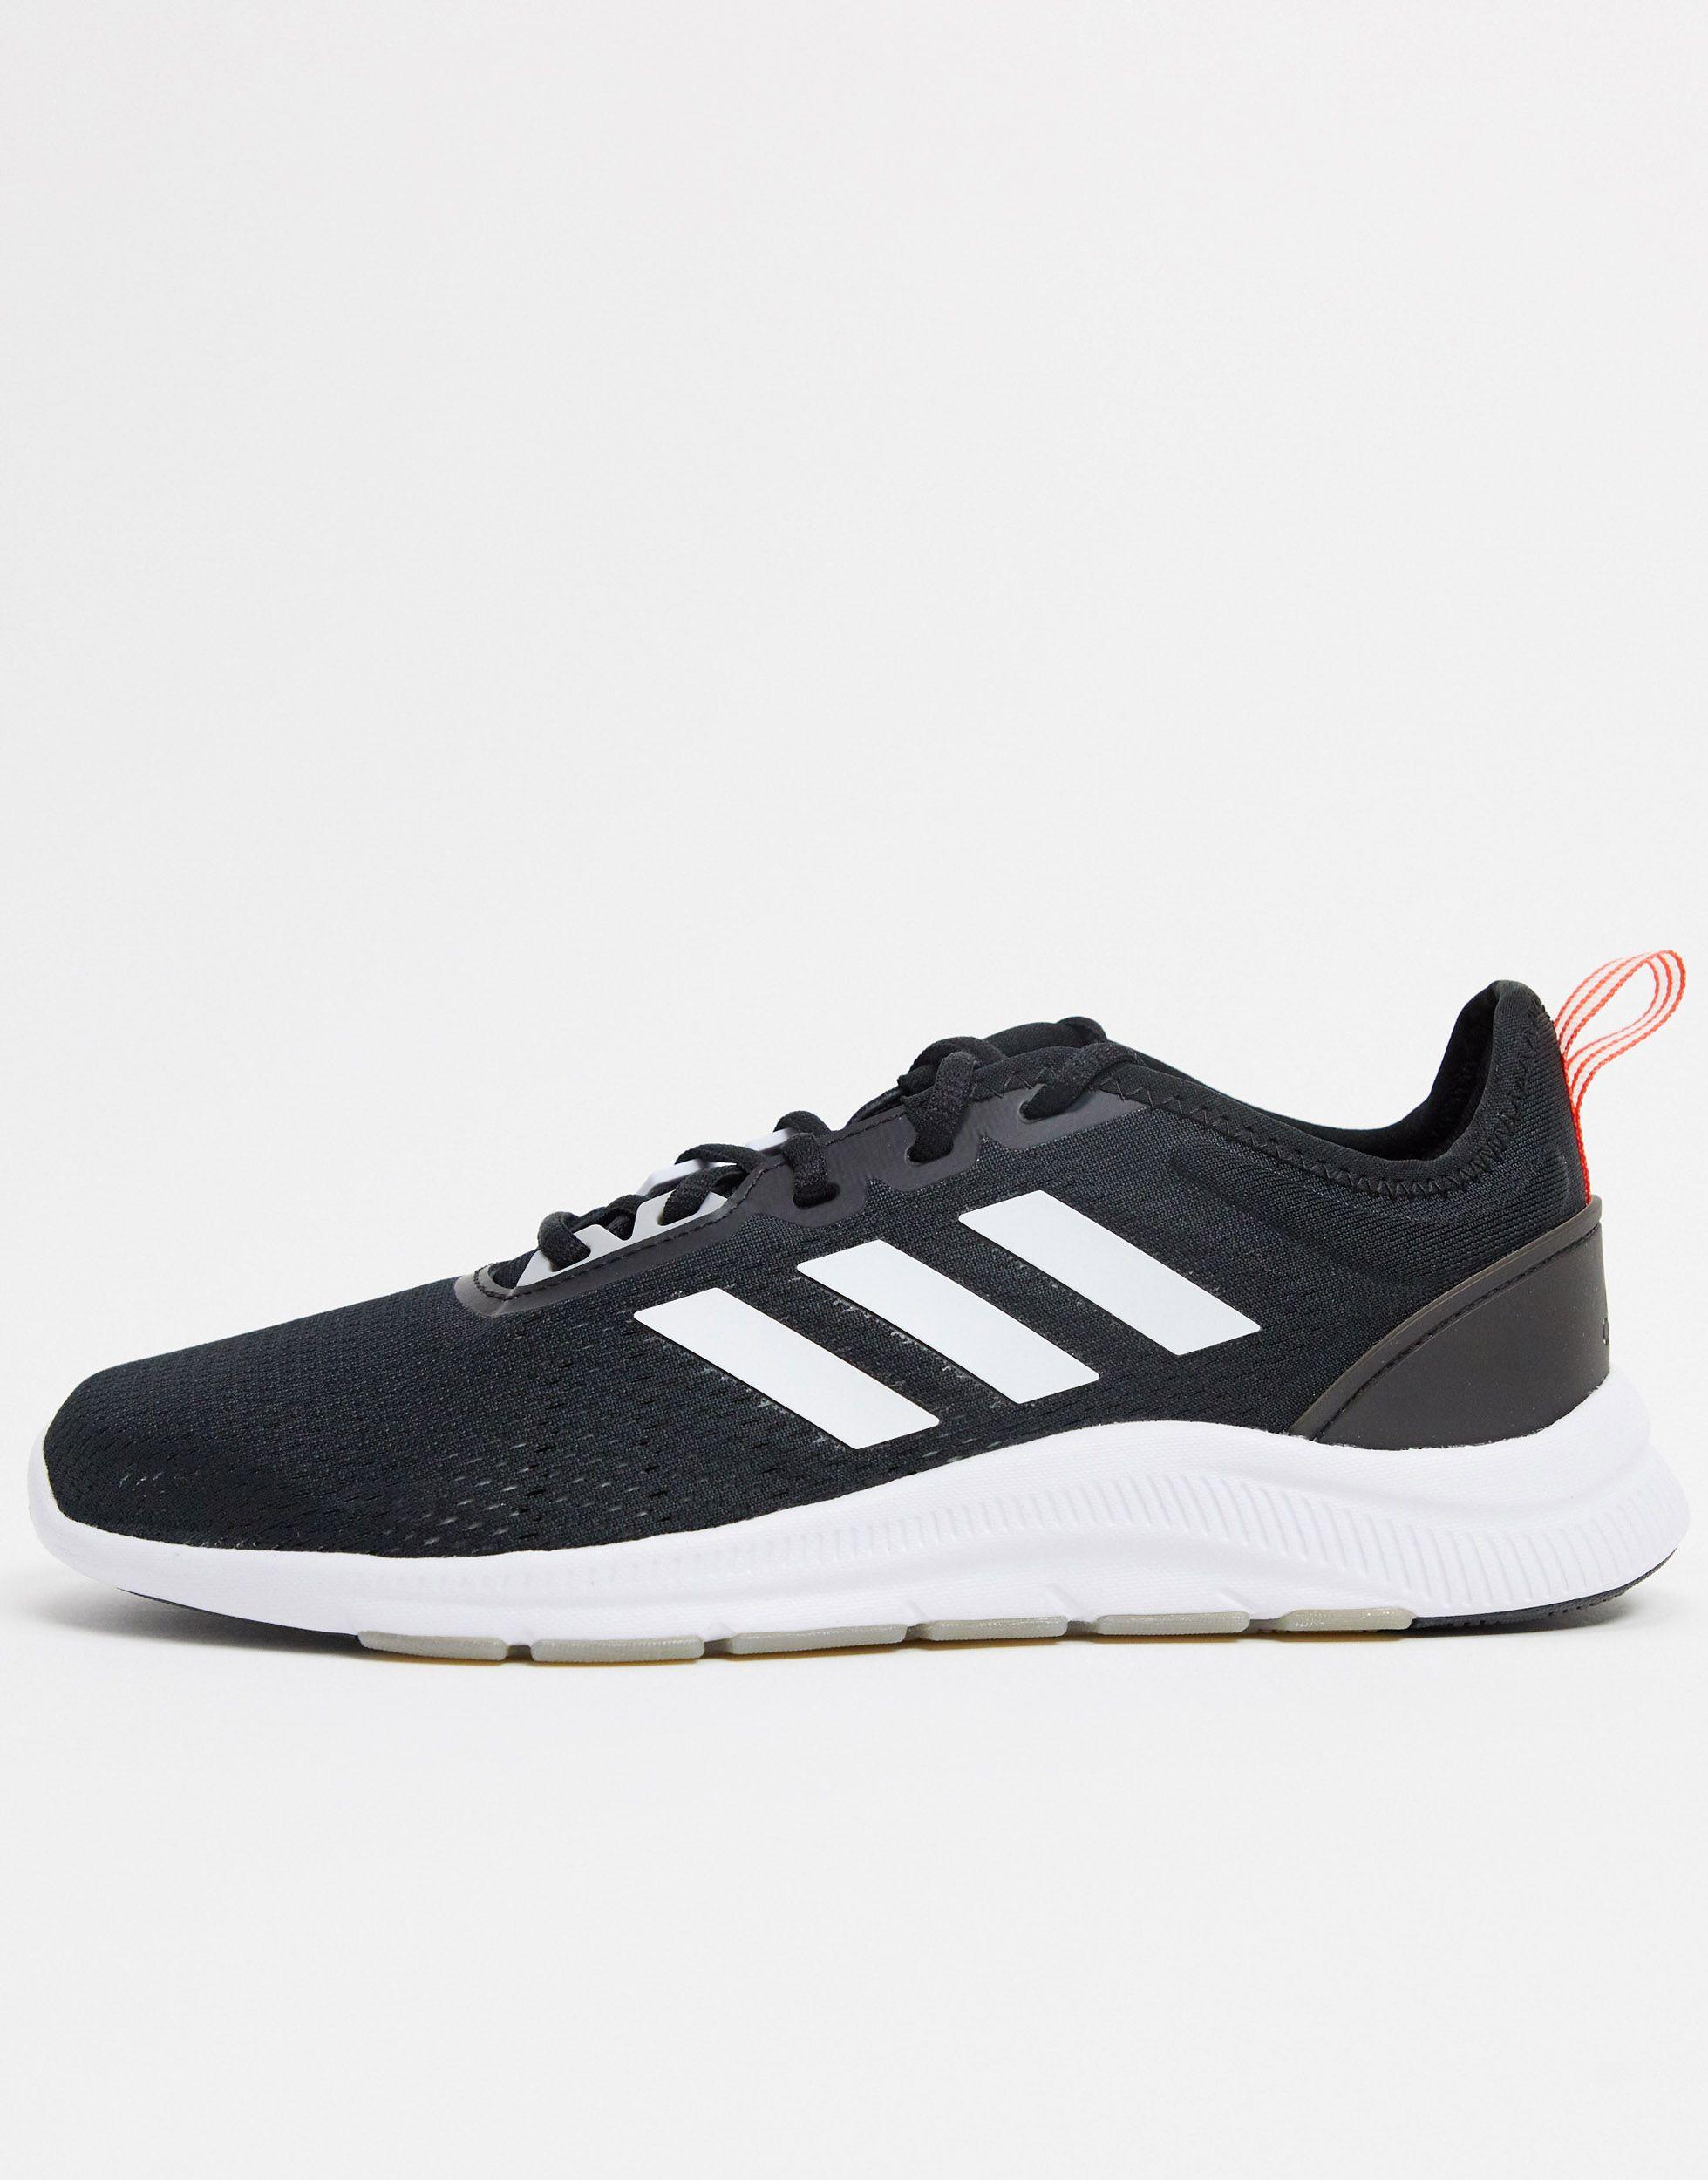 adidas Originals Rubber Adidas Running Aswetrain Trainers in Black for Men  - Lyst